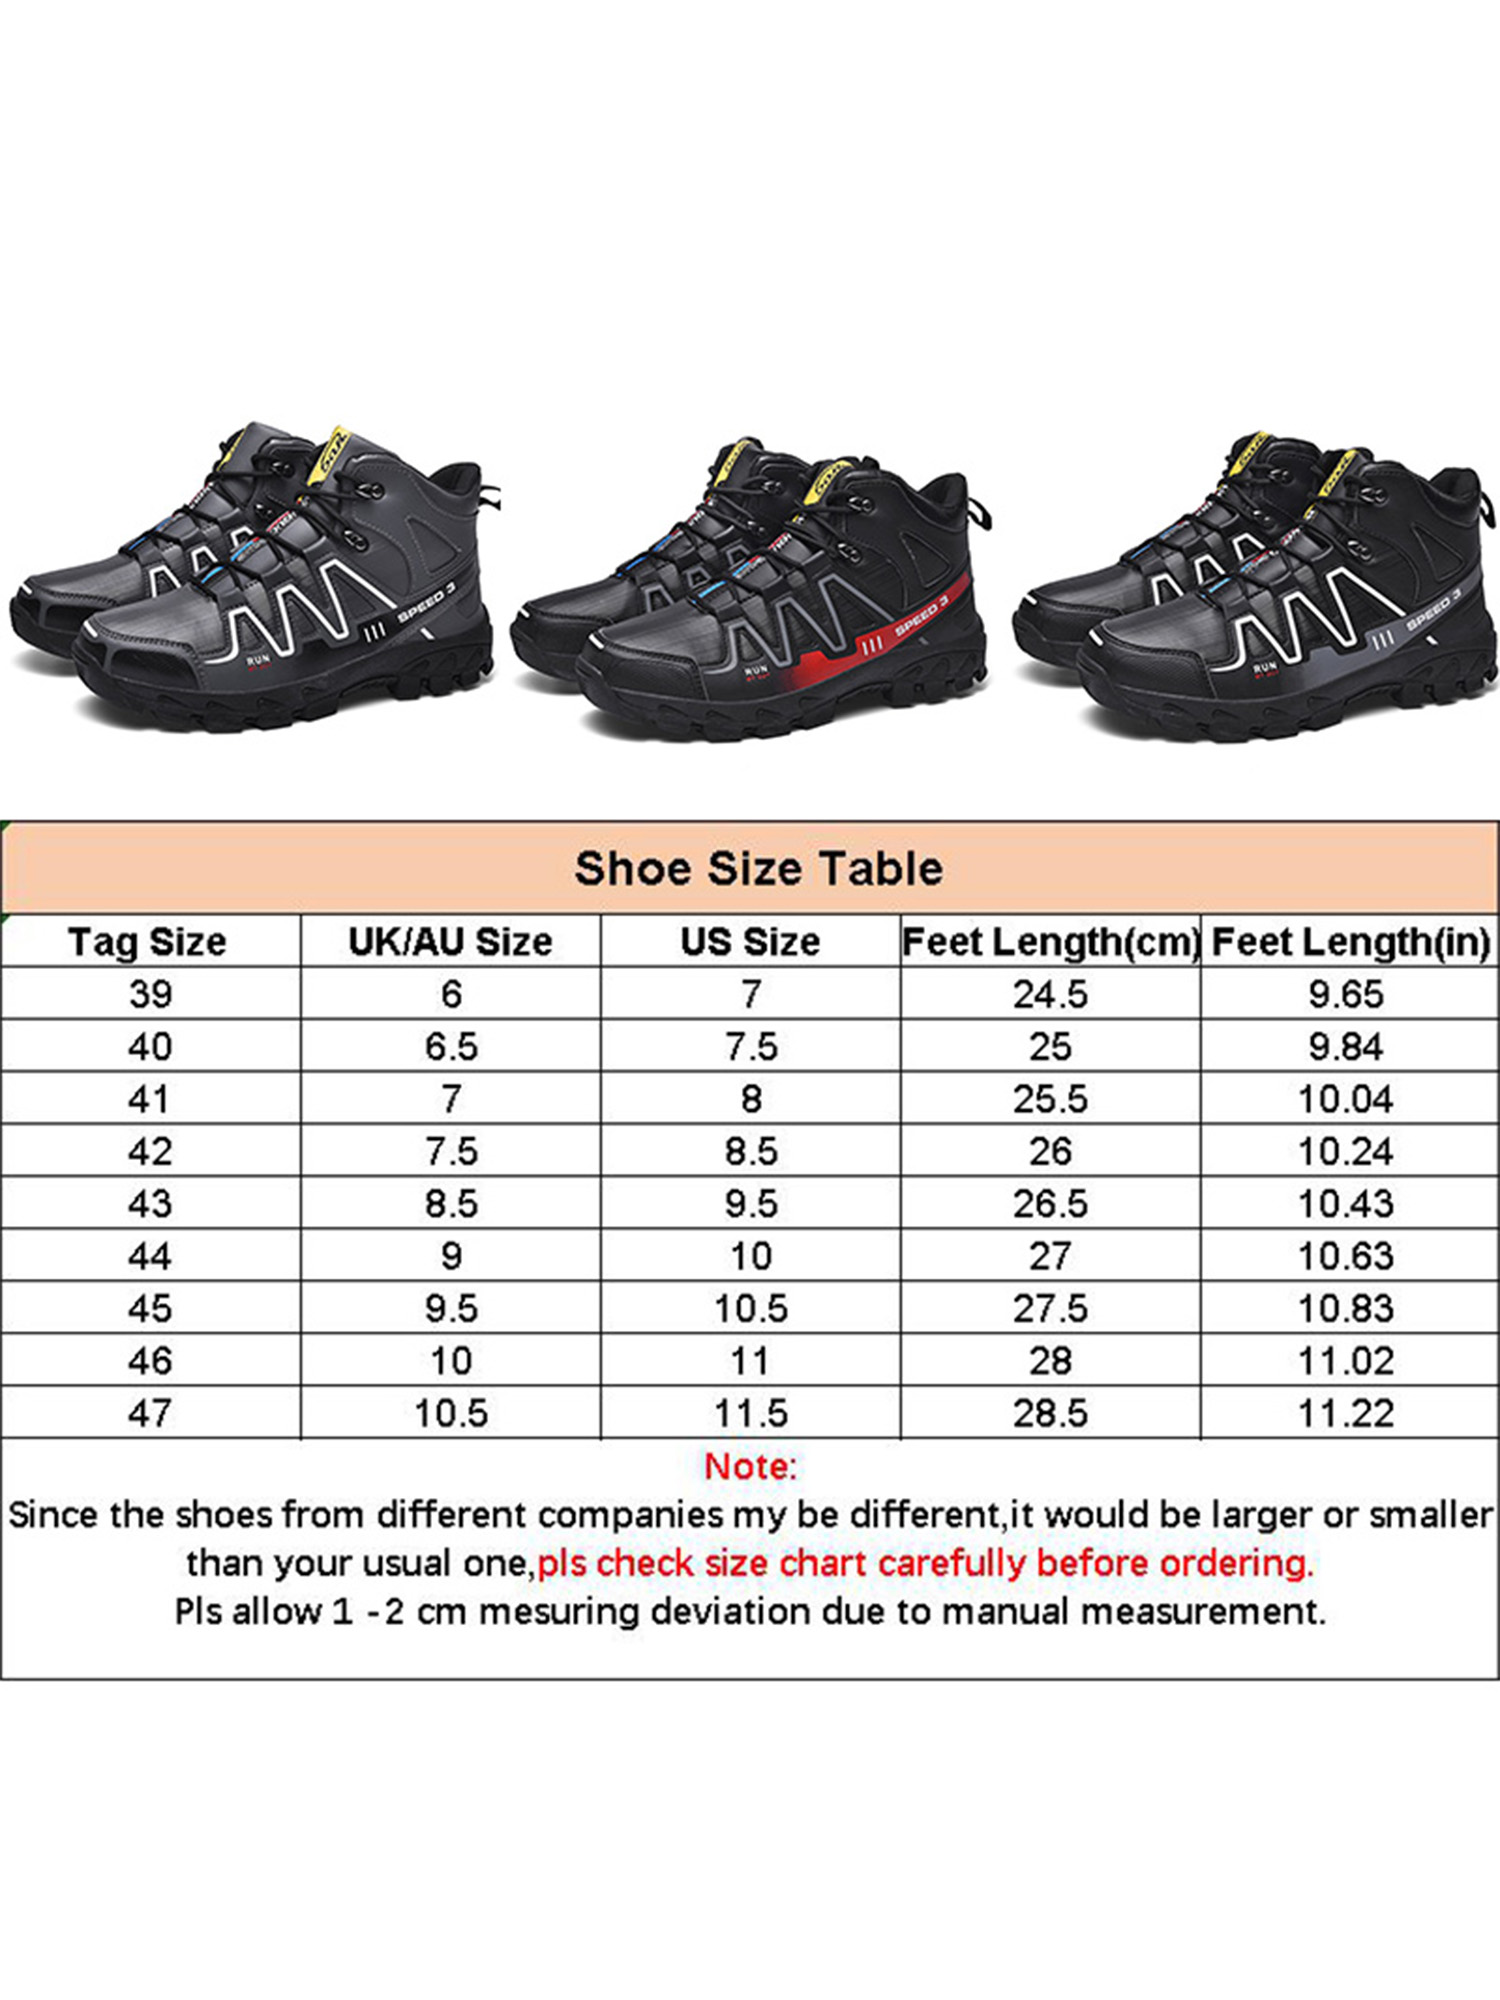 Avamo Steel Toe Sneakers for Men Waterproof Safety Shoes Slip Resistant Work Sneaker Breathable Puncture Proof Shoes-High Tops - image 2 of 7